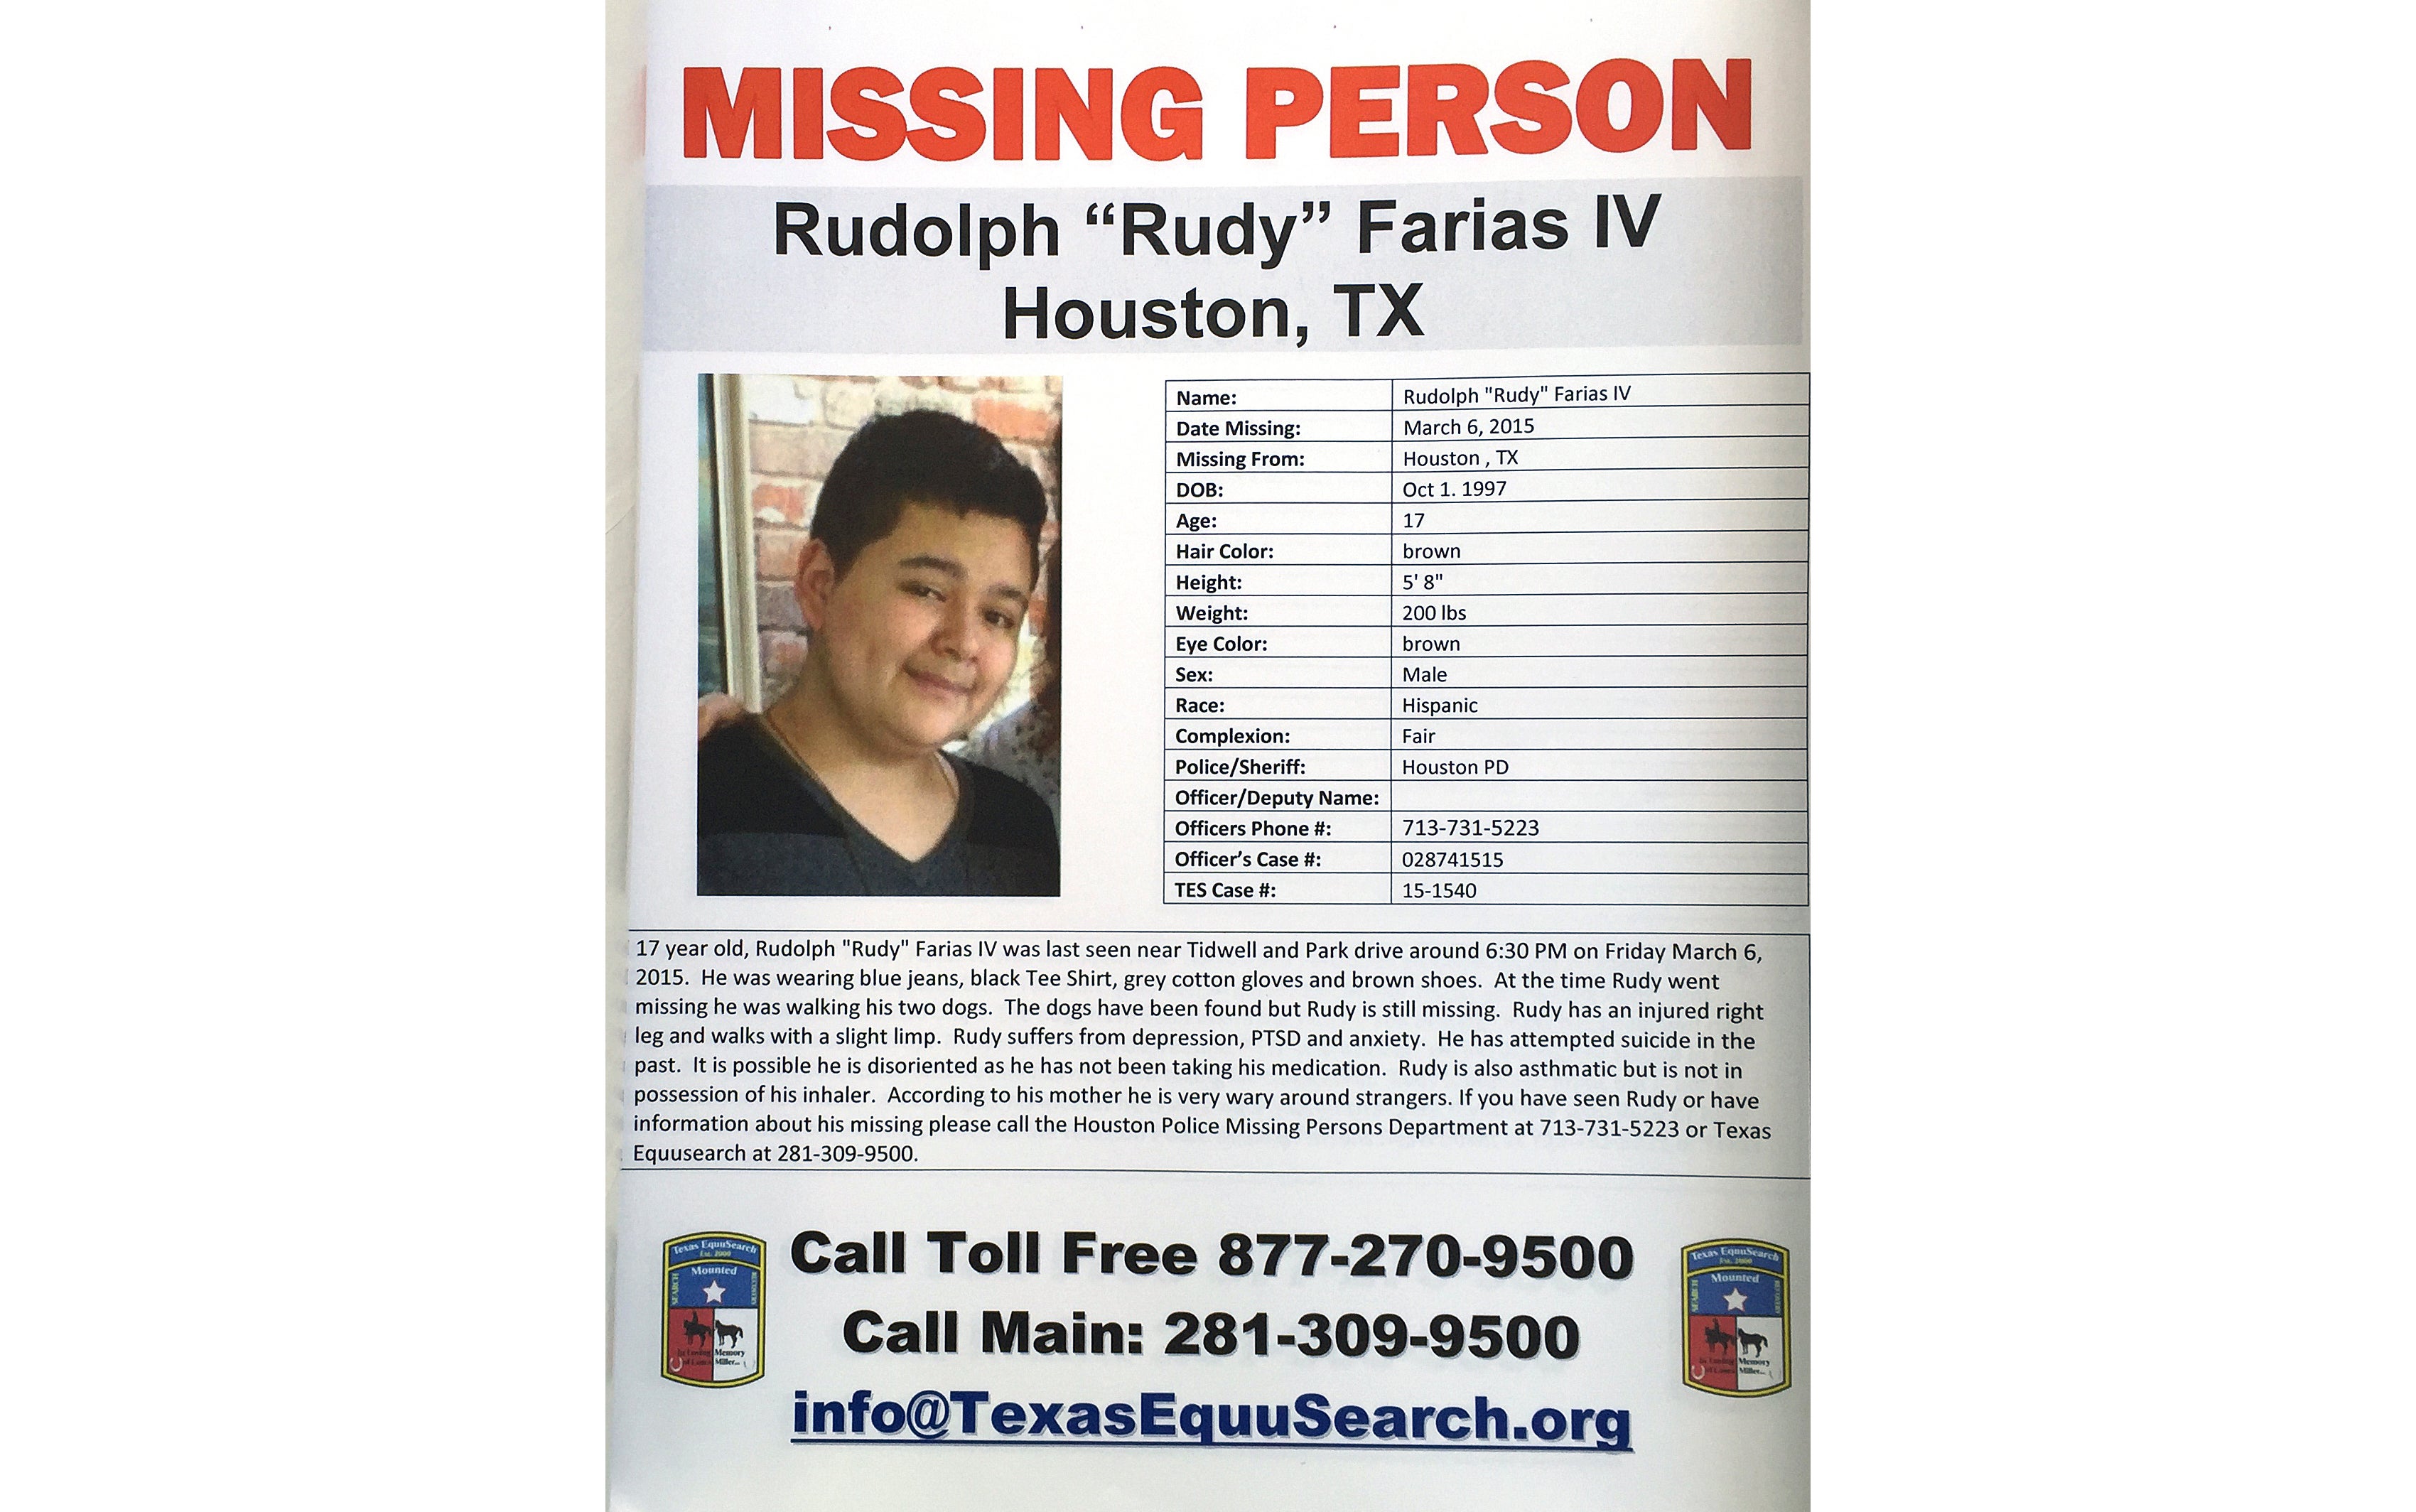 A missing person flyer identified Rudy Farias as suffering from PTSD and depression